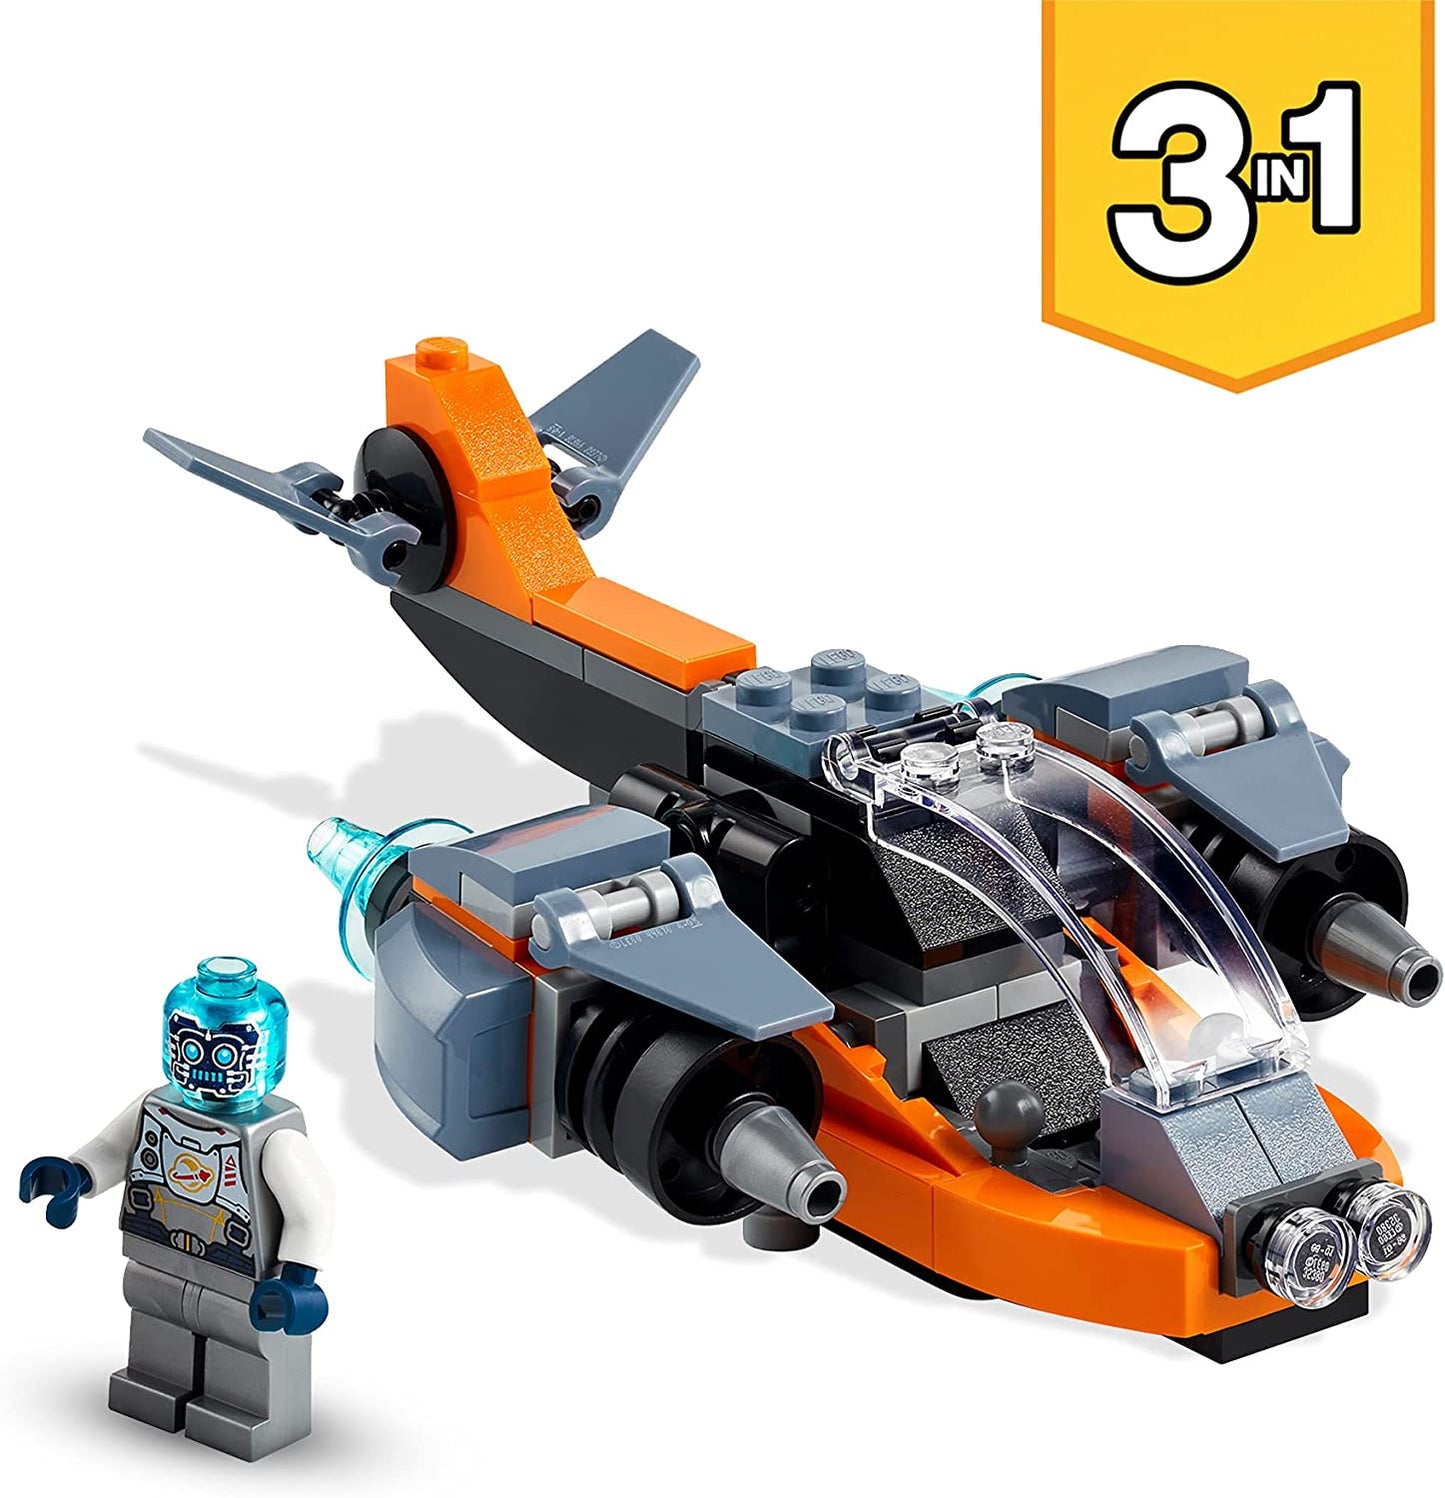 LEGO 31111 Creator 3-in-1 Cyber-Drohne - Cyber-Mech - Hoverbike Roboter Minifigur